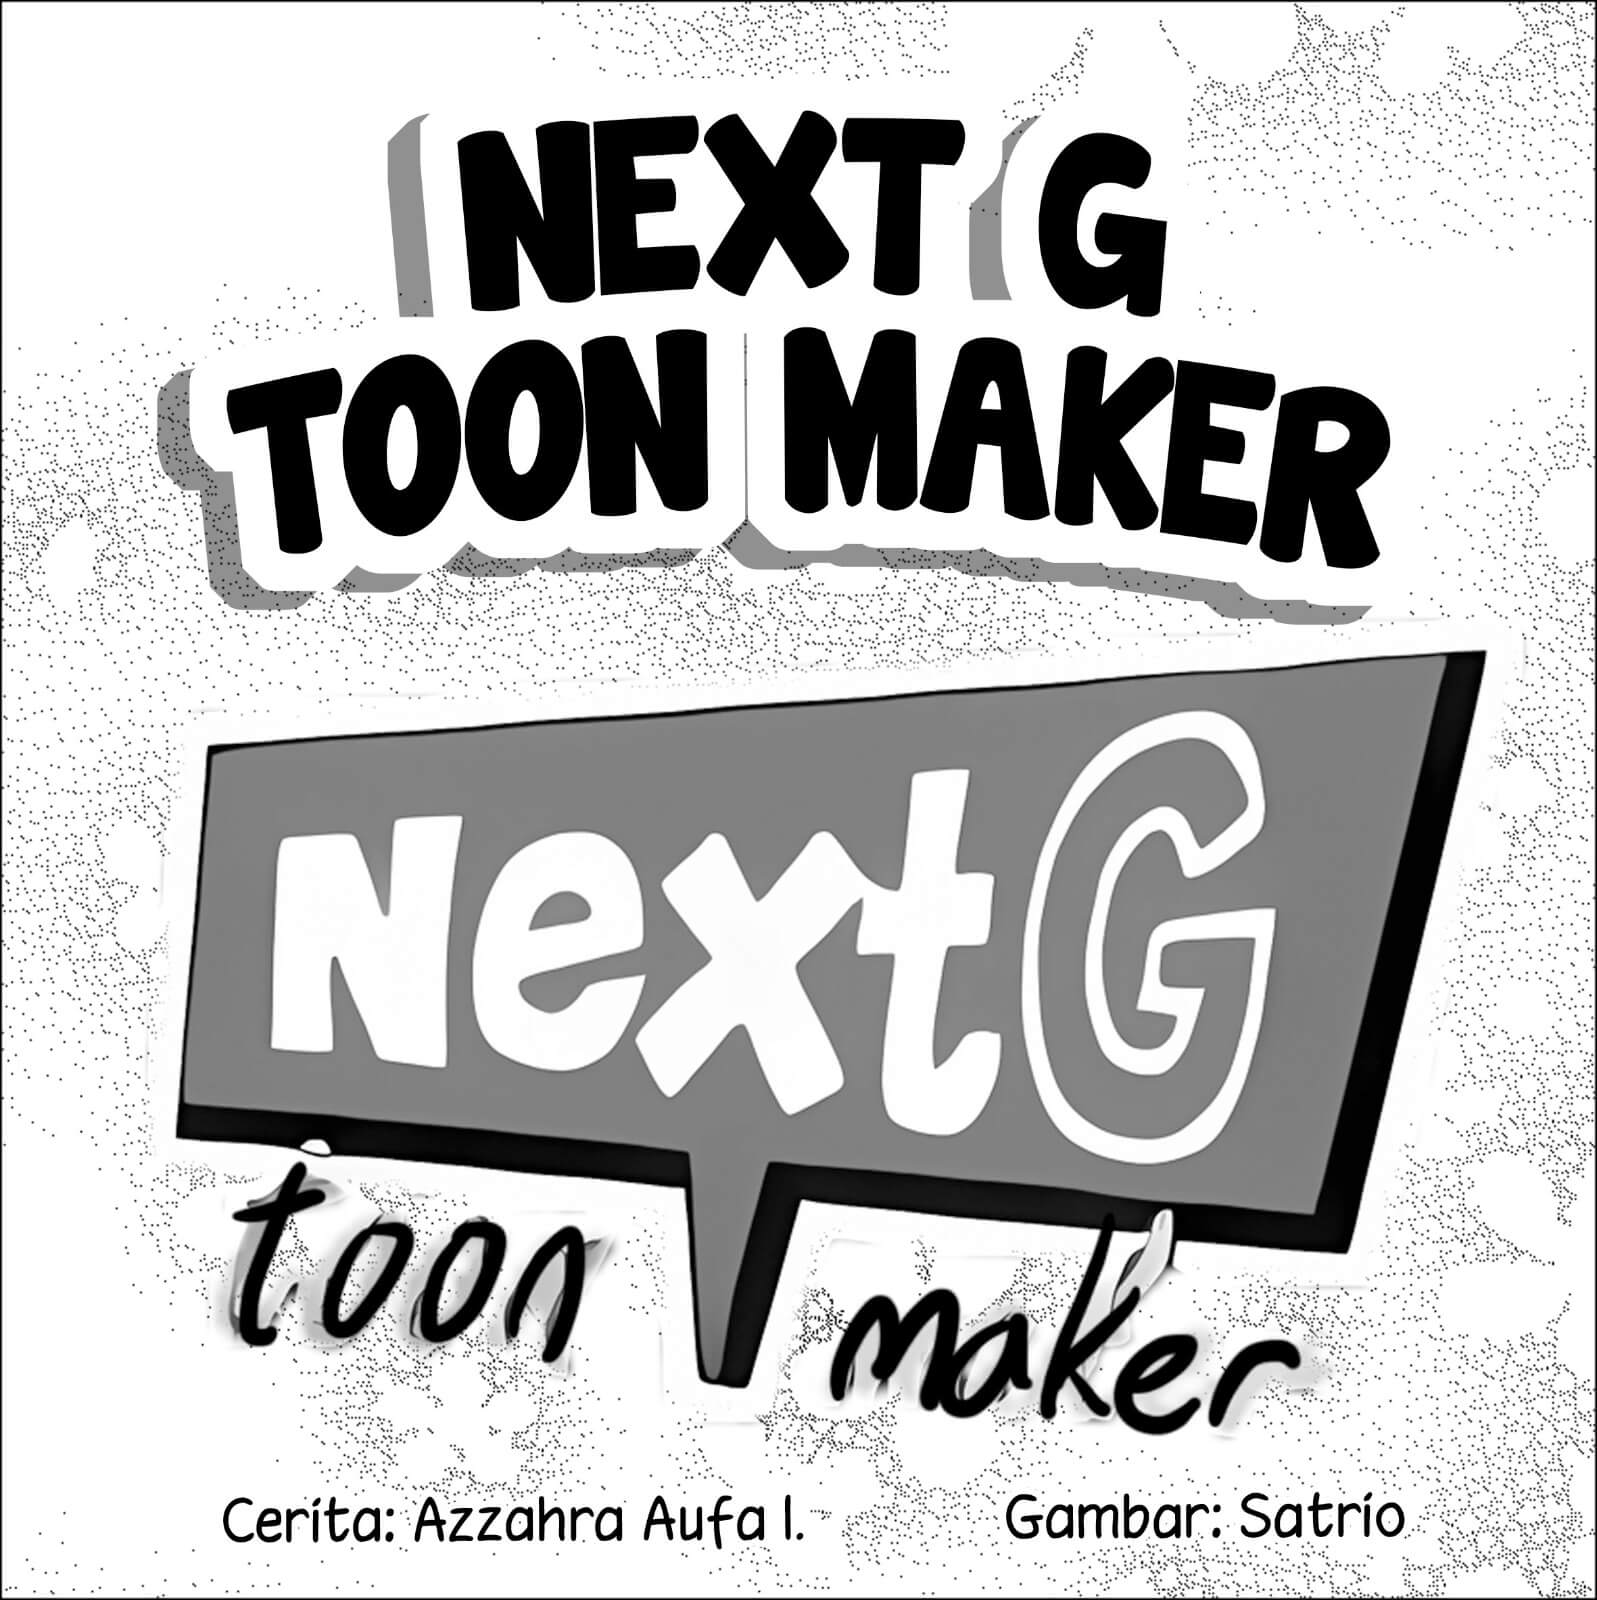 Next G Toon Maker cover bw